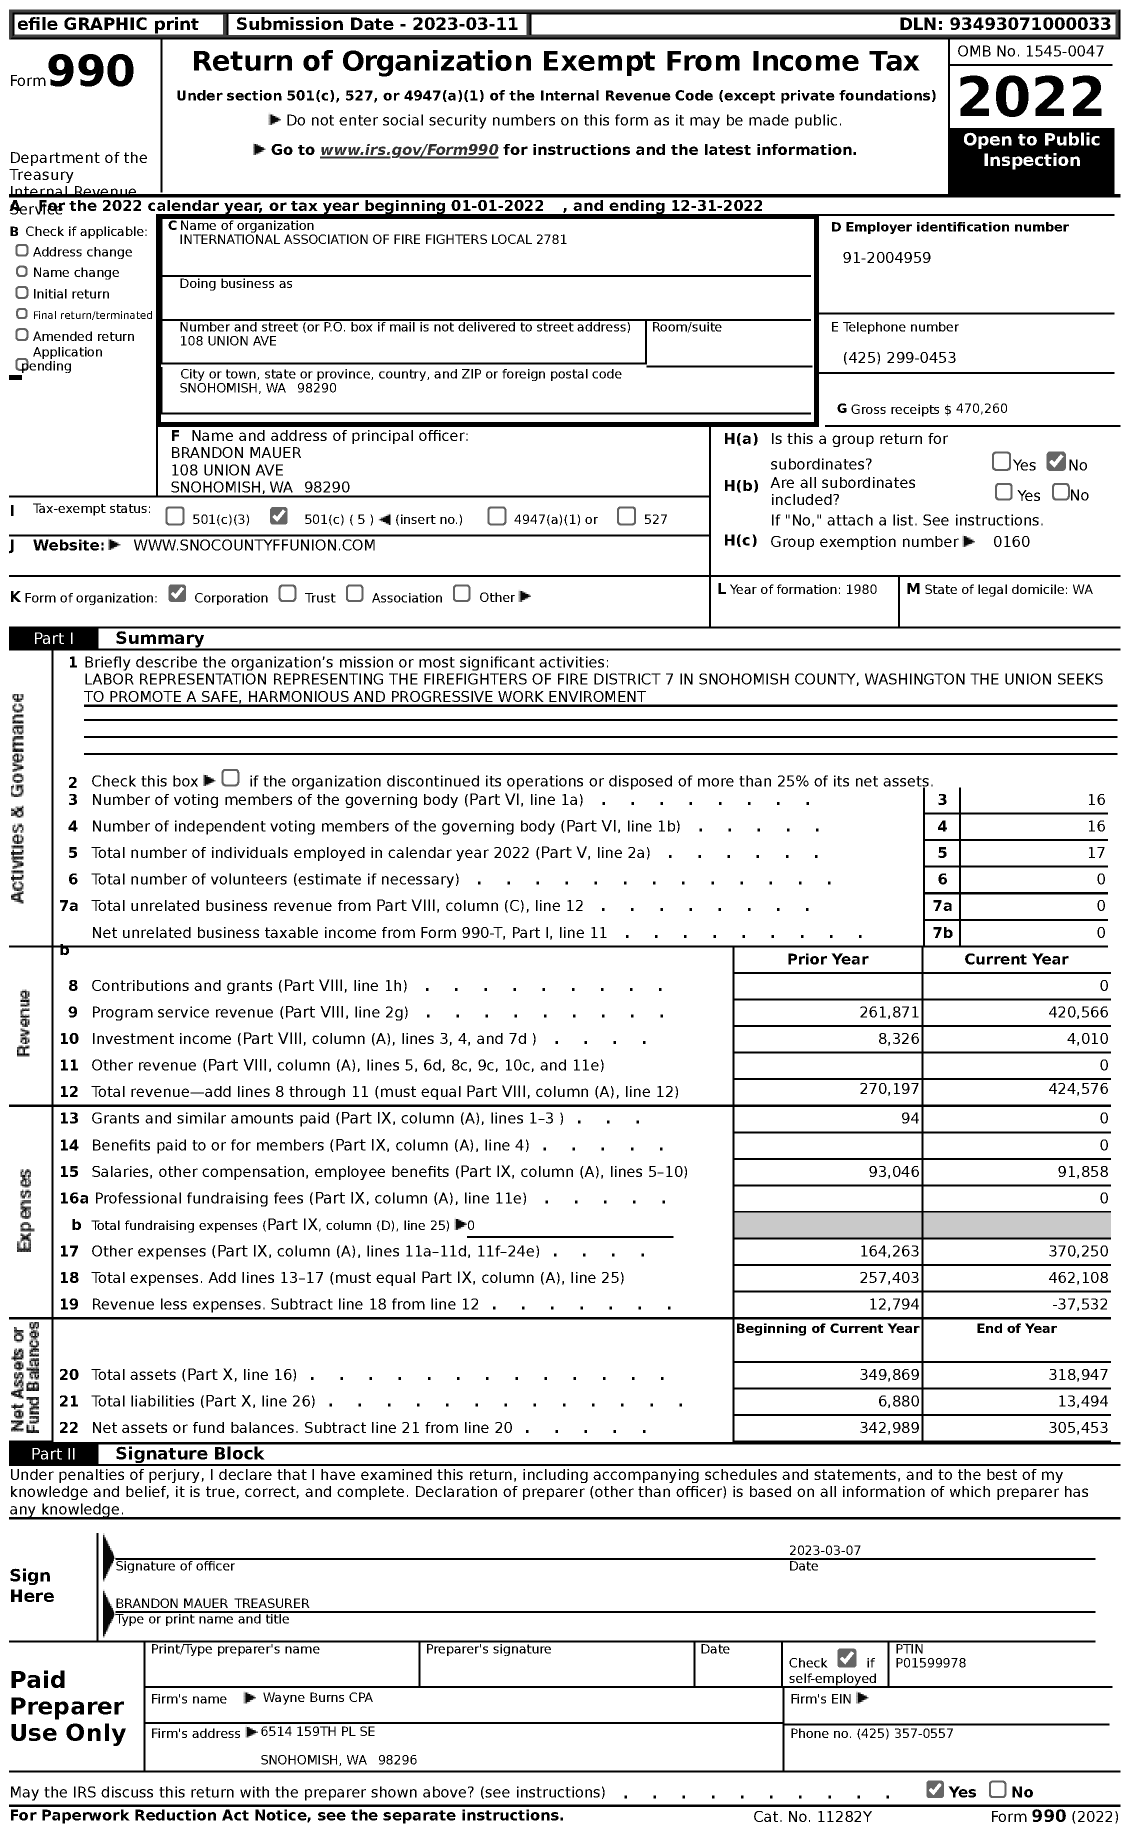 Image of first page of 2022 Form 990 for International Association of Fire Fighters - L2781 Union FF of Snohomish Co